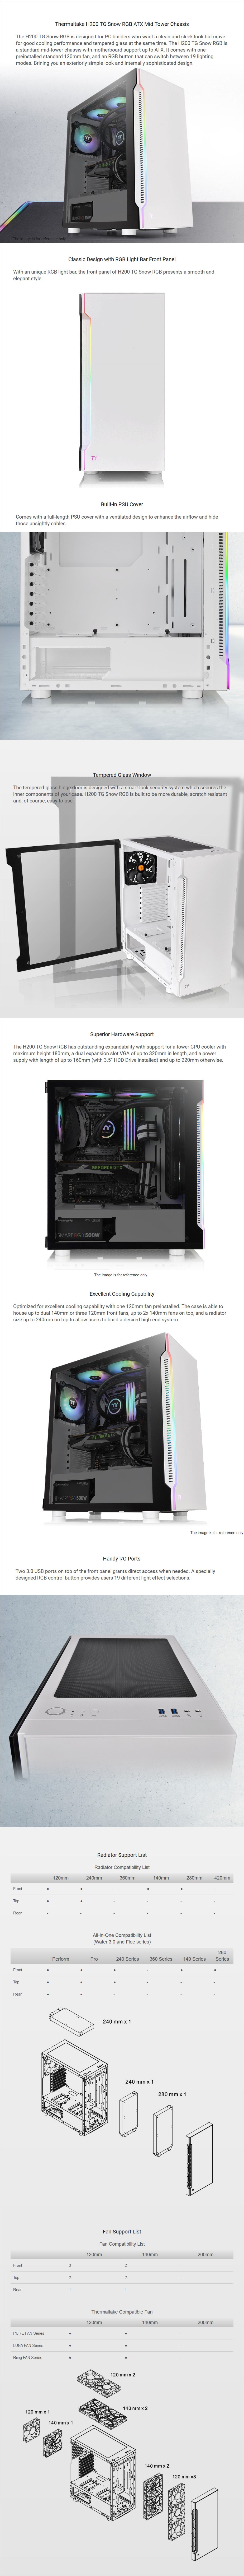 Thermaltake H200 RGB Tempered Glass Mid-Tower ATX Case - Snow - Overview 1